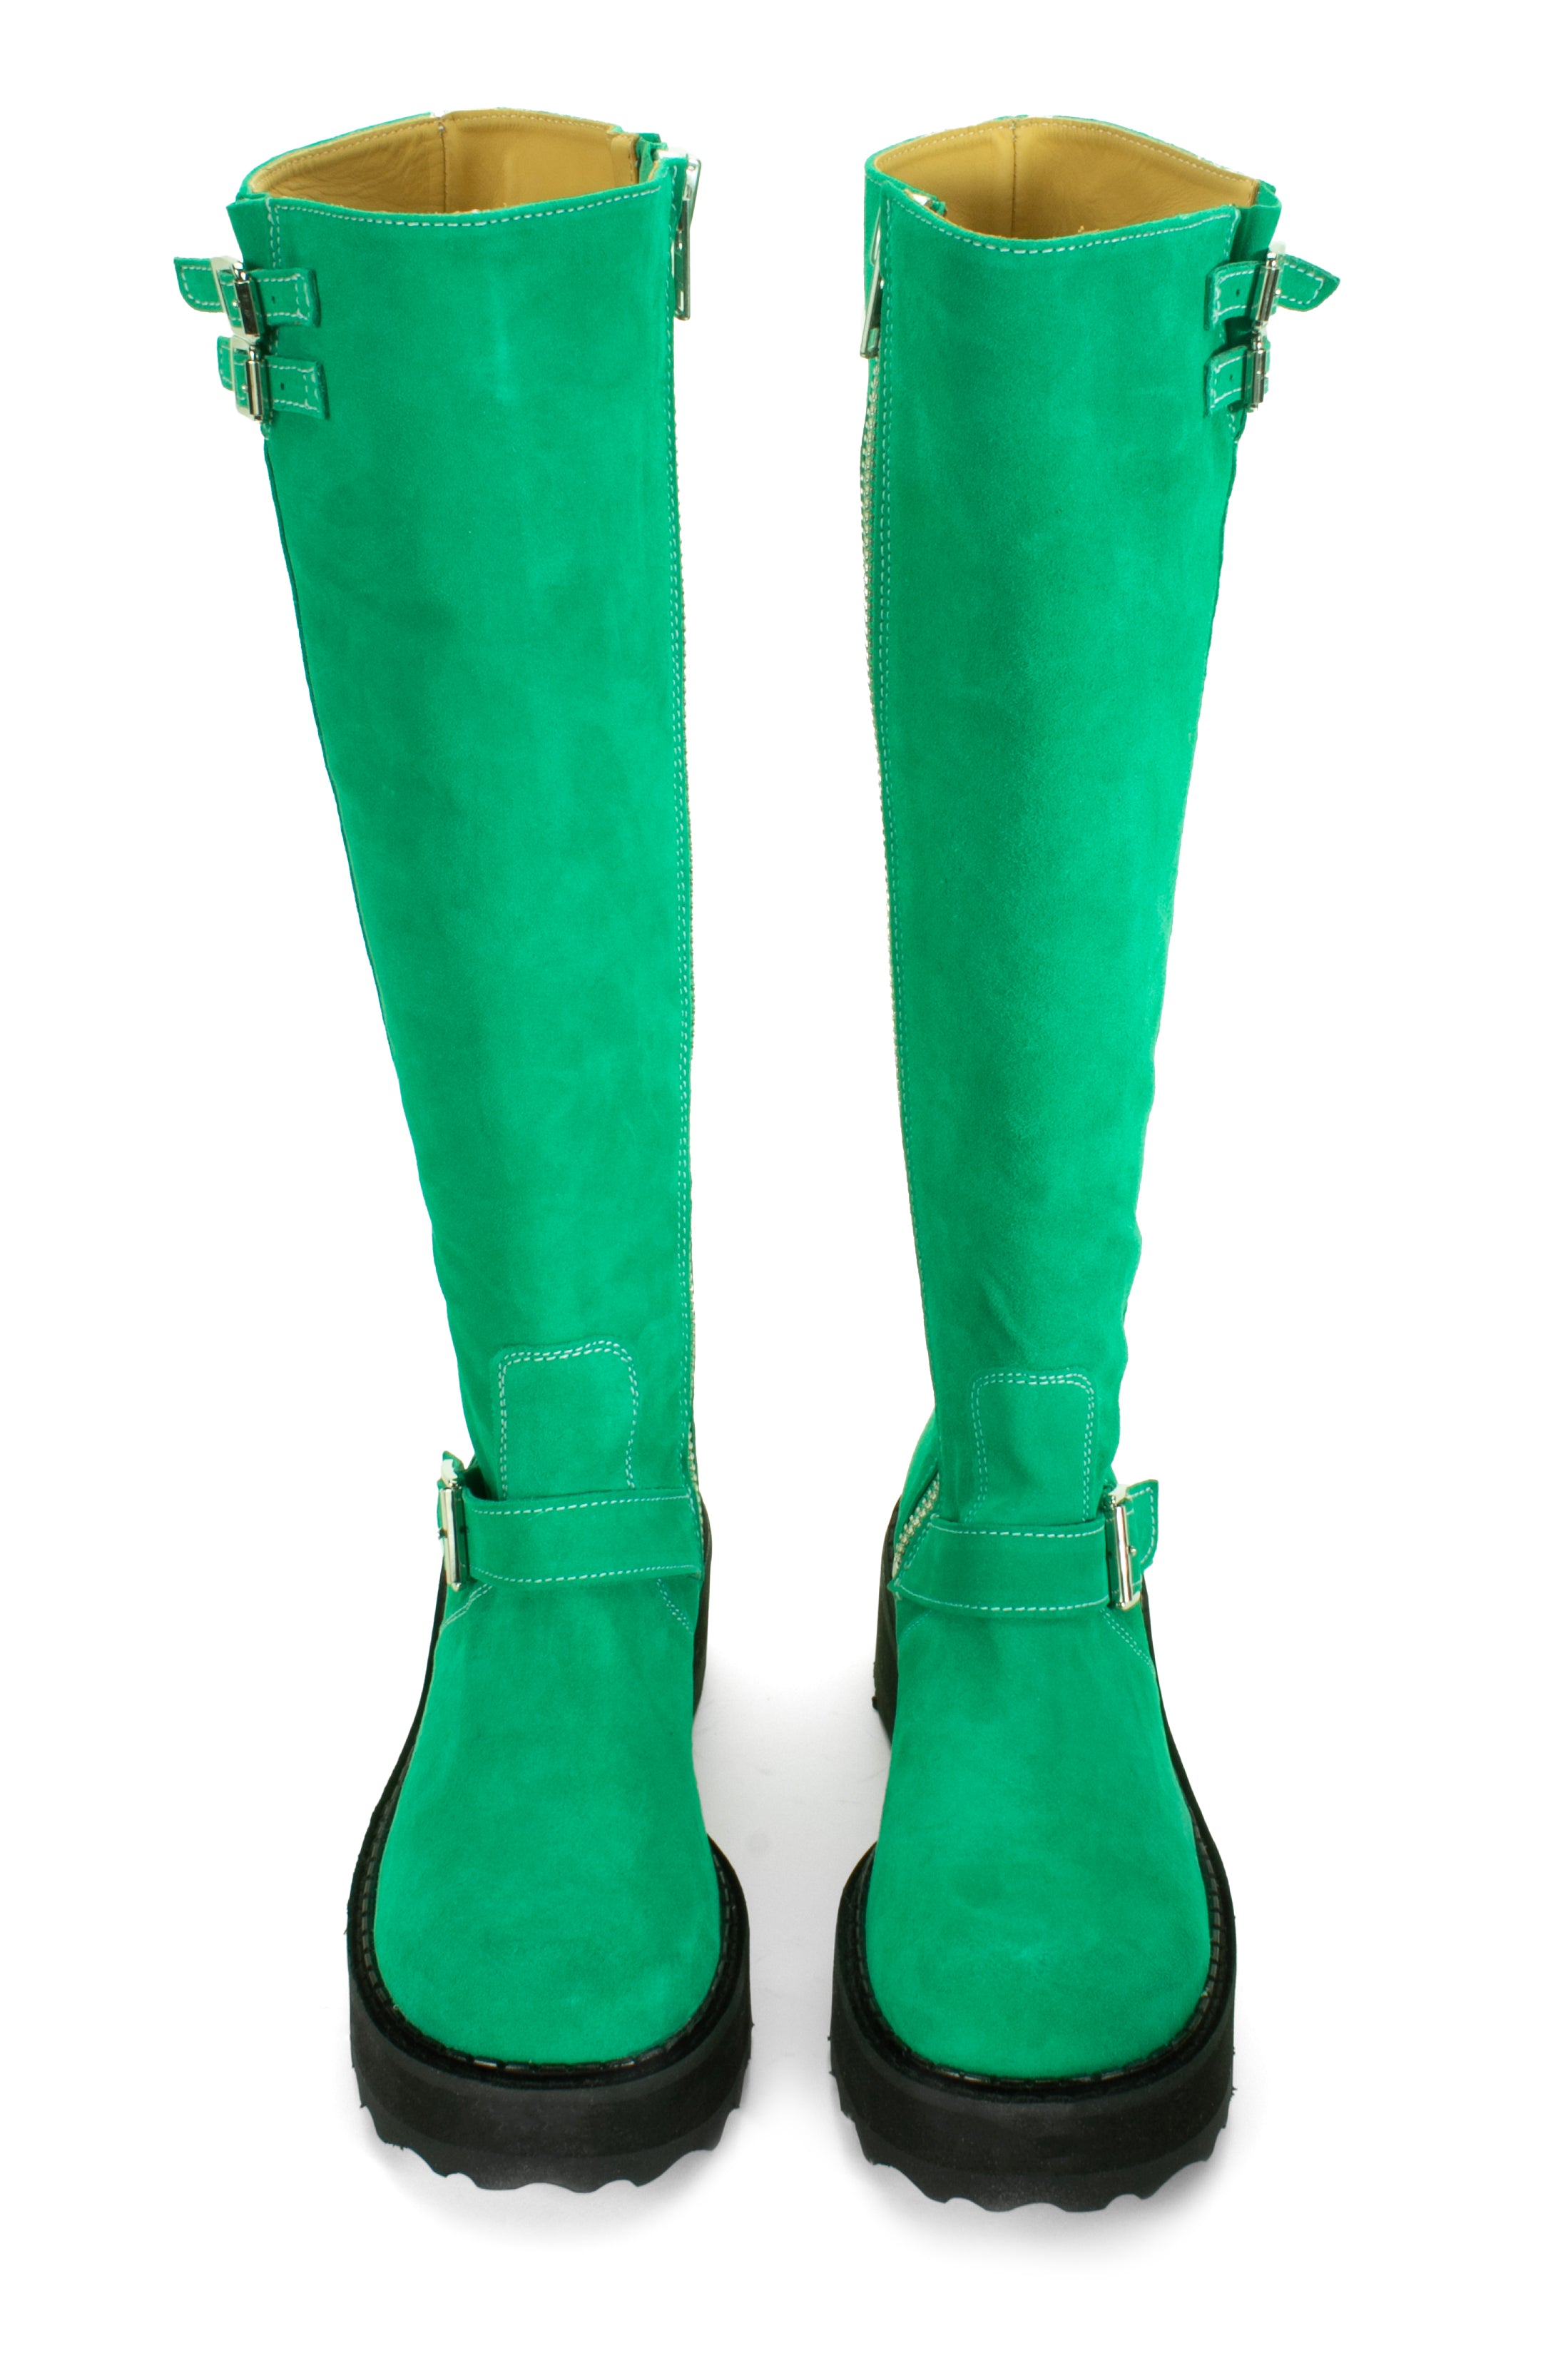 Boot in green is an under-the-knee-high, suede boot with a leather top sole and a heel height of 1.5". 